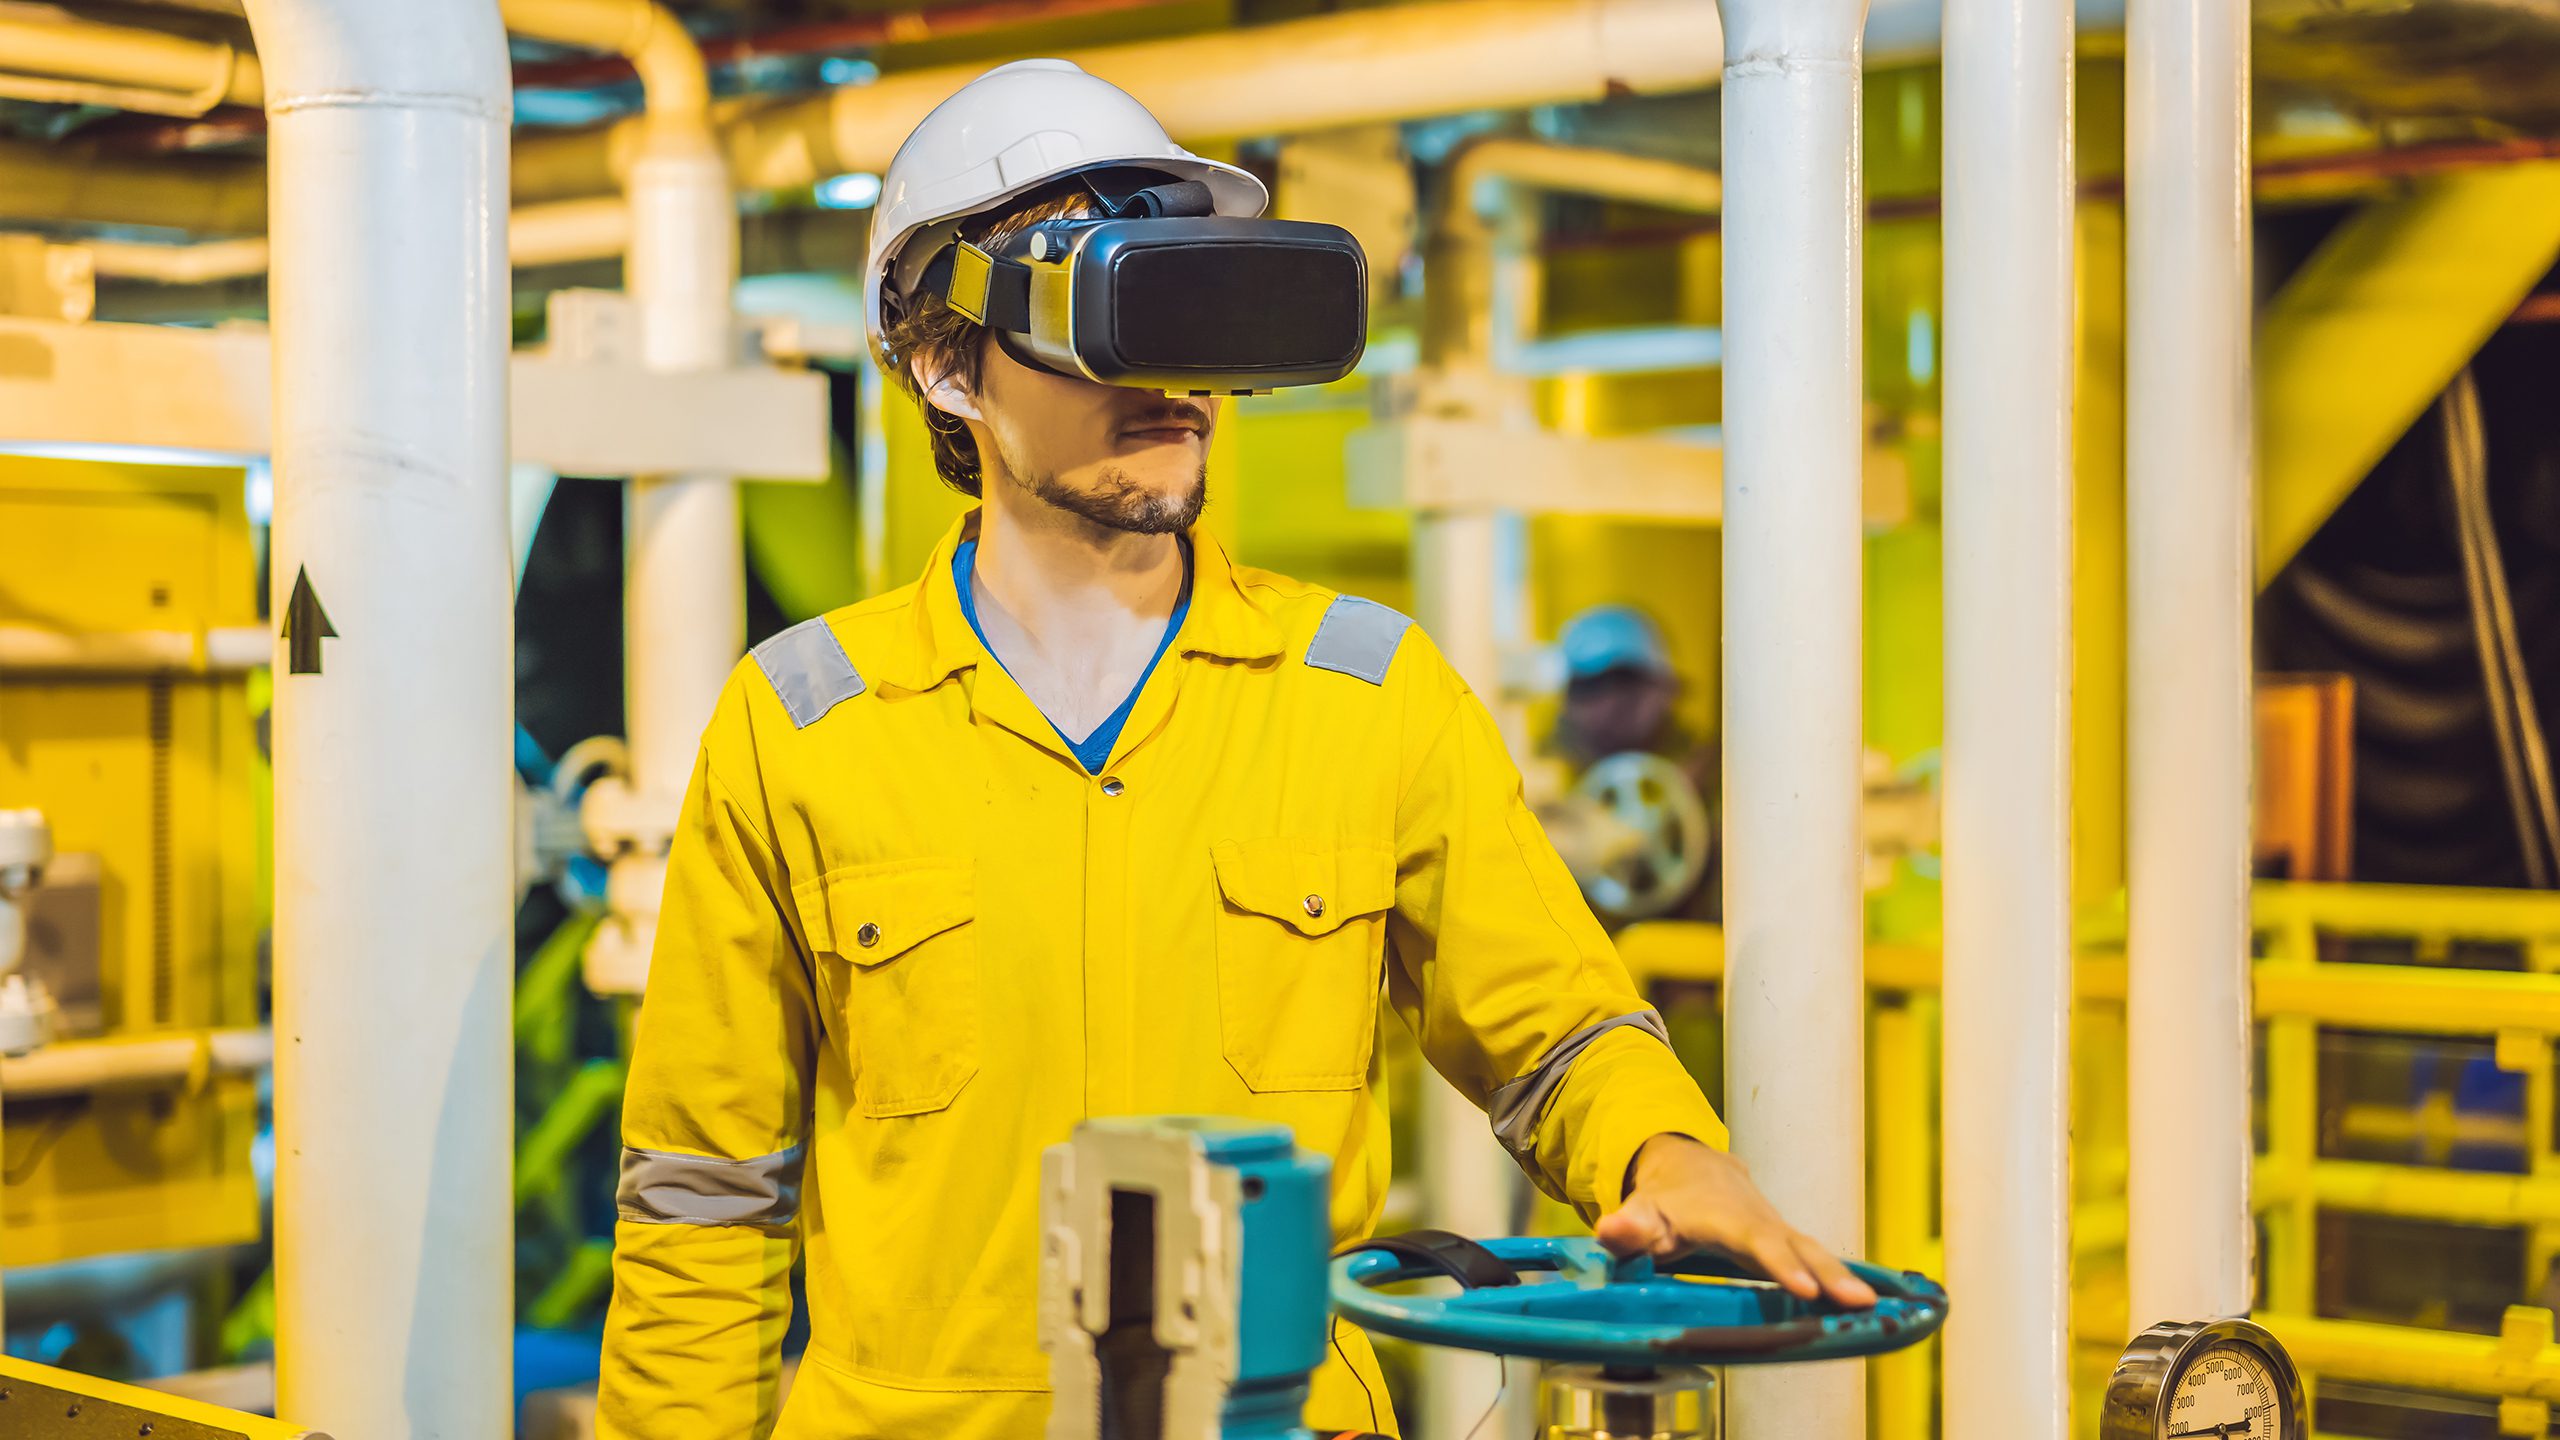 A man wearing a VR headset in an industrial setting